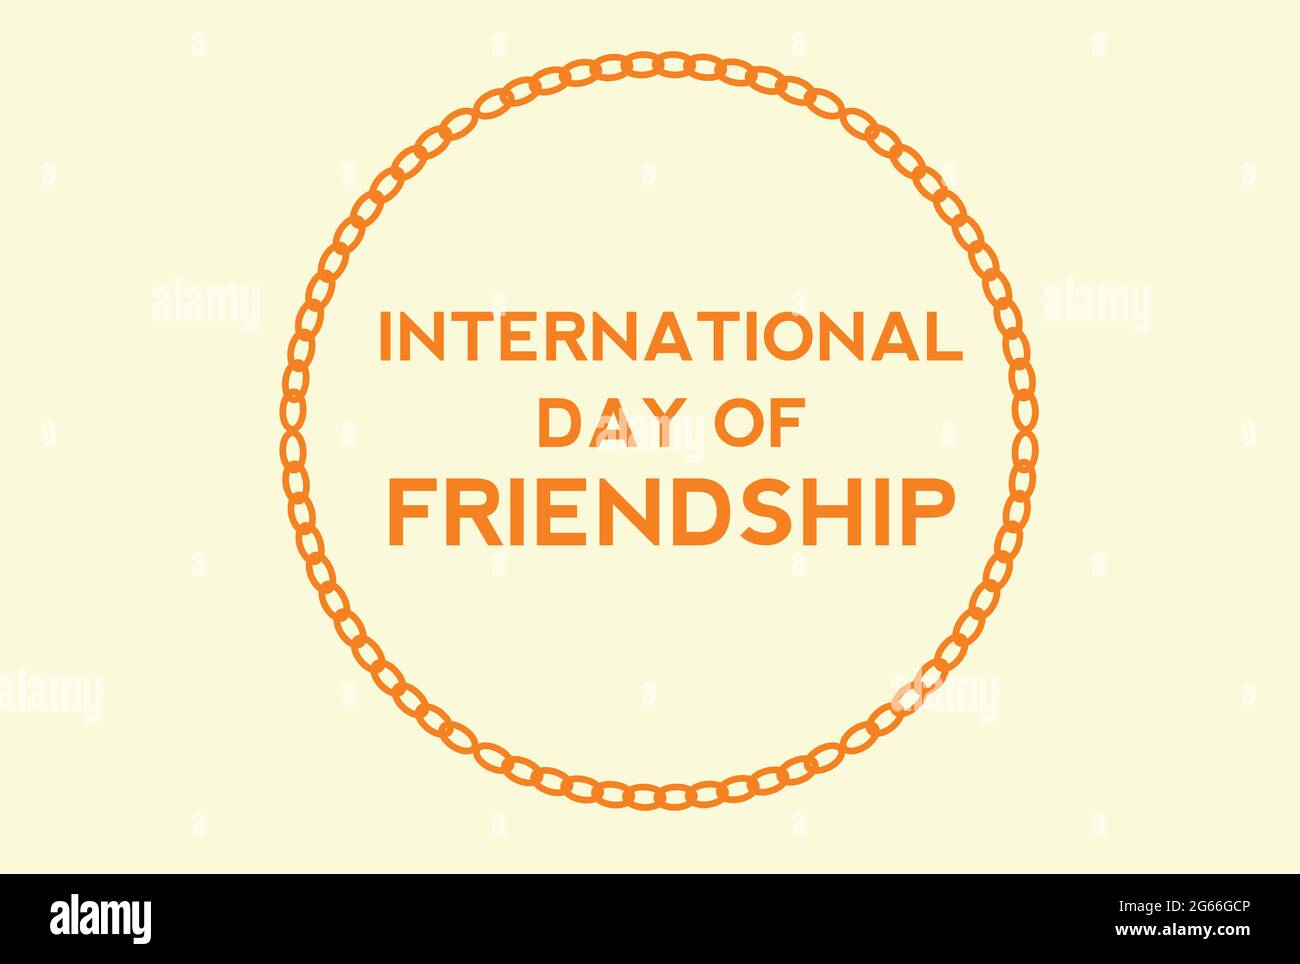 International day of friendship vector template Stock Vector